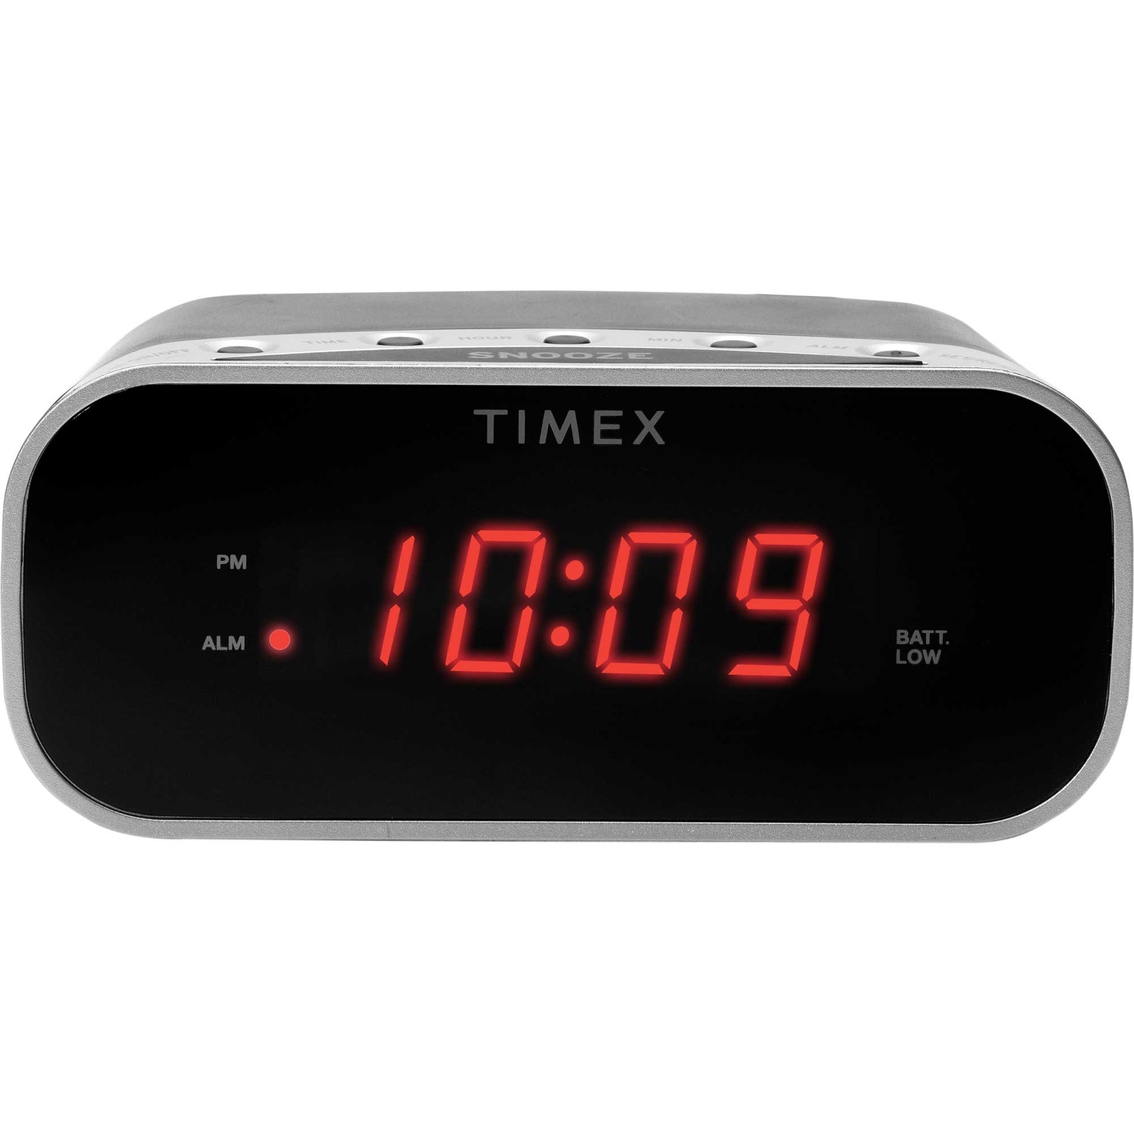 Timex Alarm Clock with 0.7 in. Red Display - Image 2 of 2